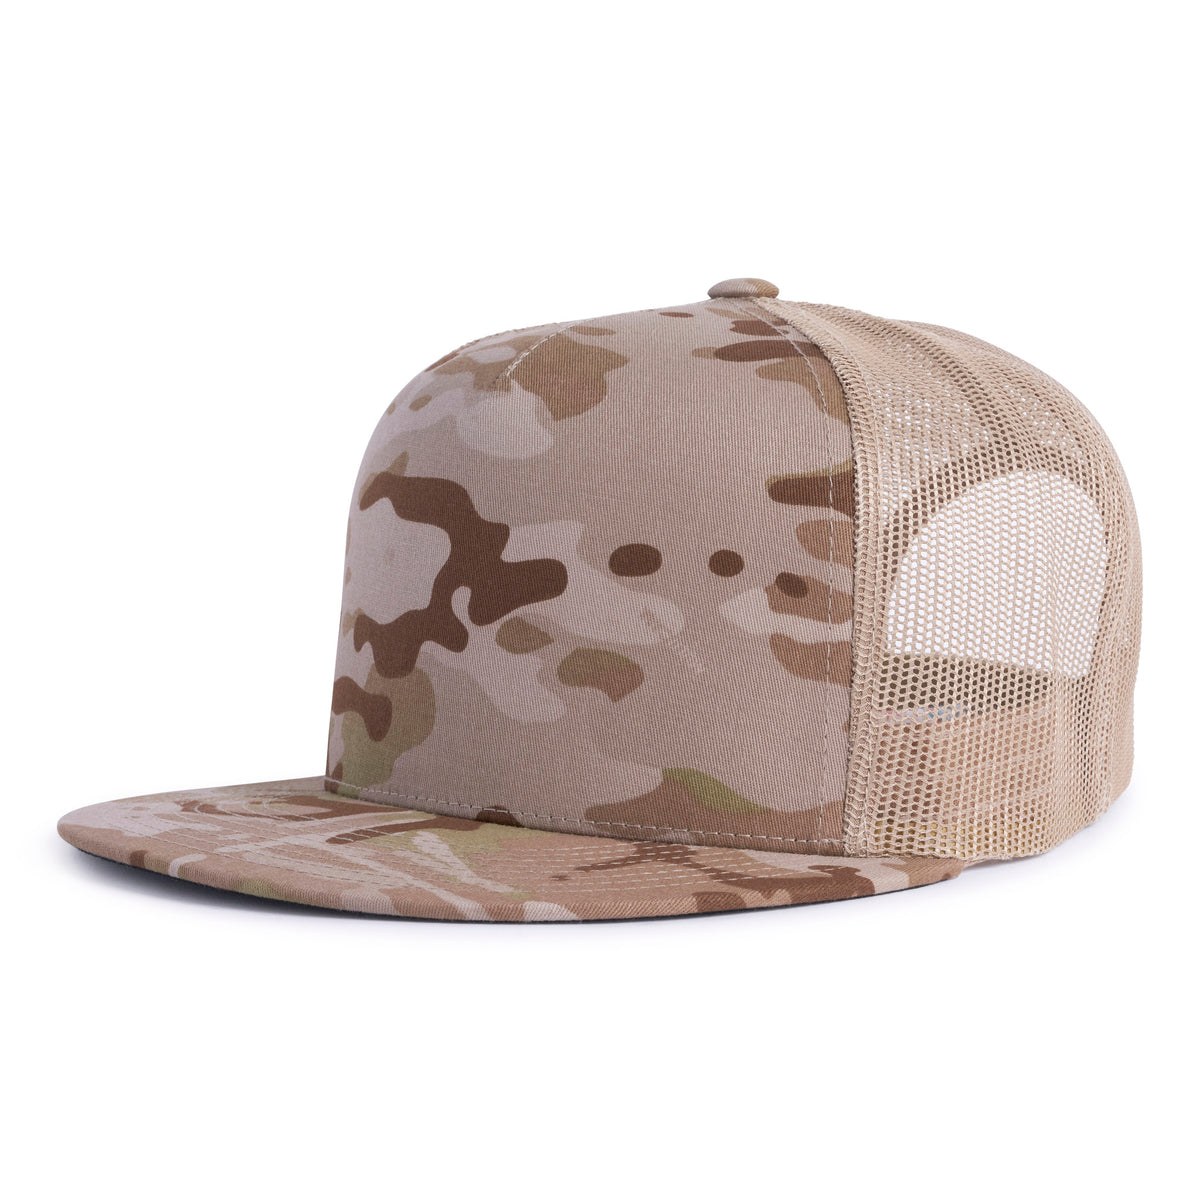 Tan, brown, and khaki camo trucker hat with a flat bill, 5-panels, structured high crown, tan mesh back, and a snapback closure from Tailgate Hats.